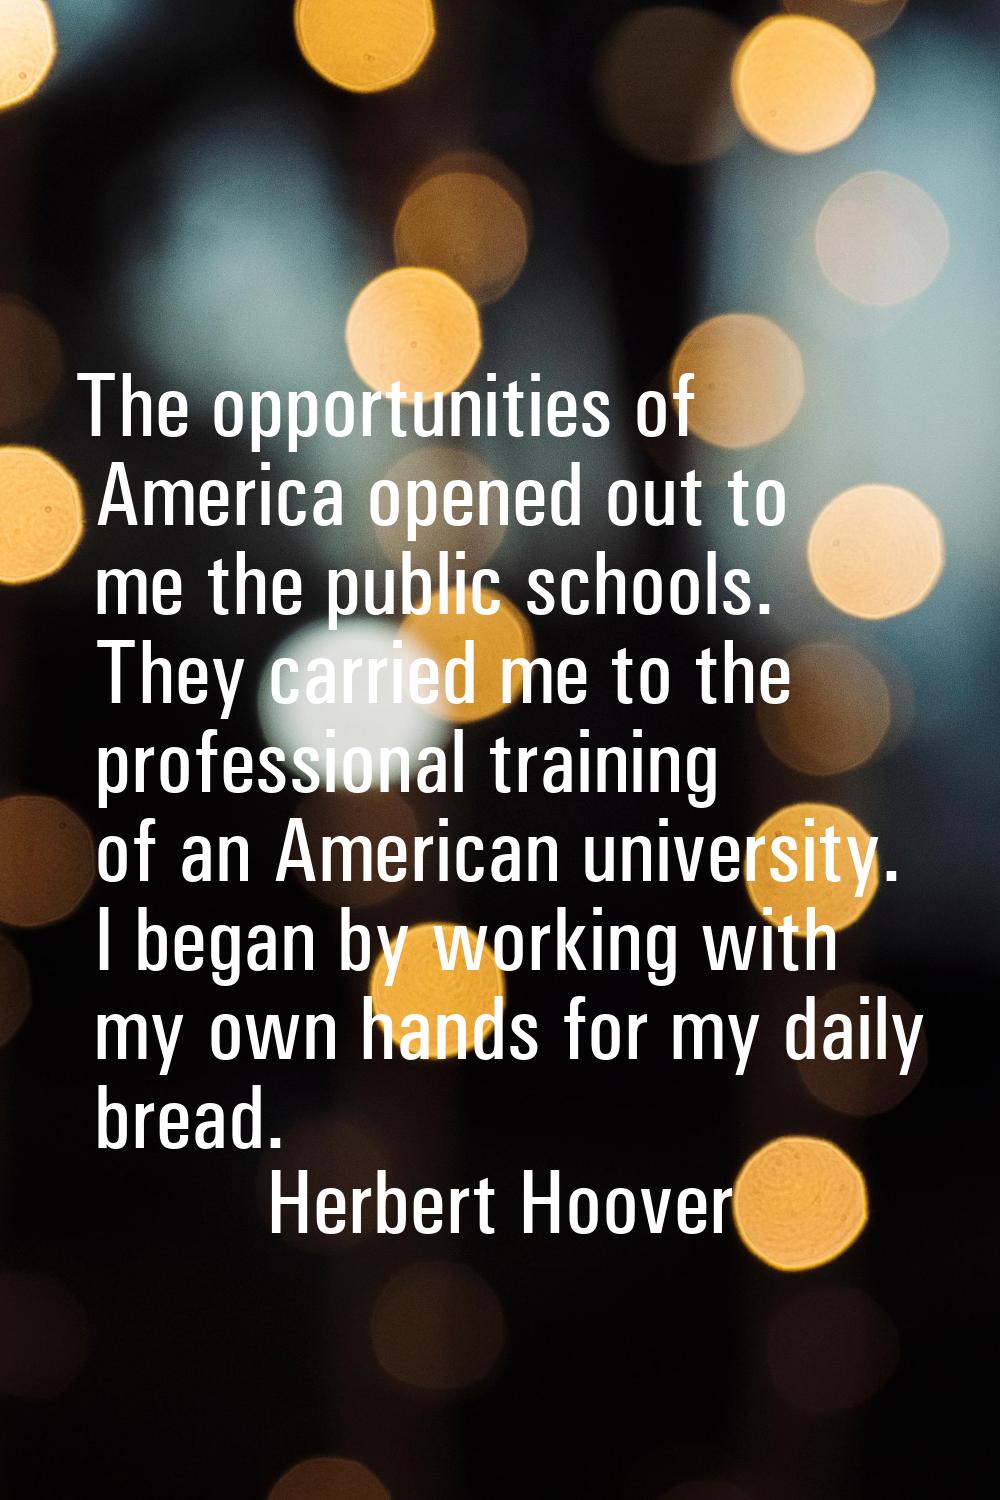 The opportunities of America opened out to me the public schools. They carried me to the profession